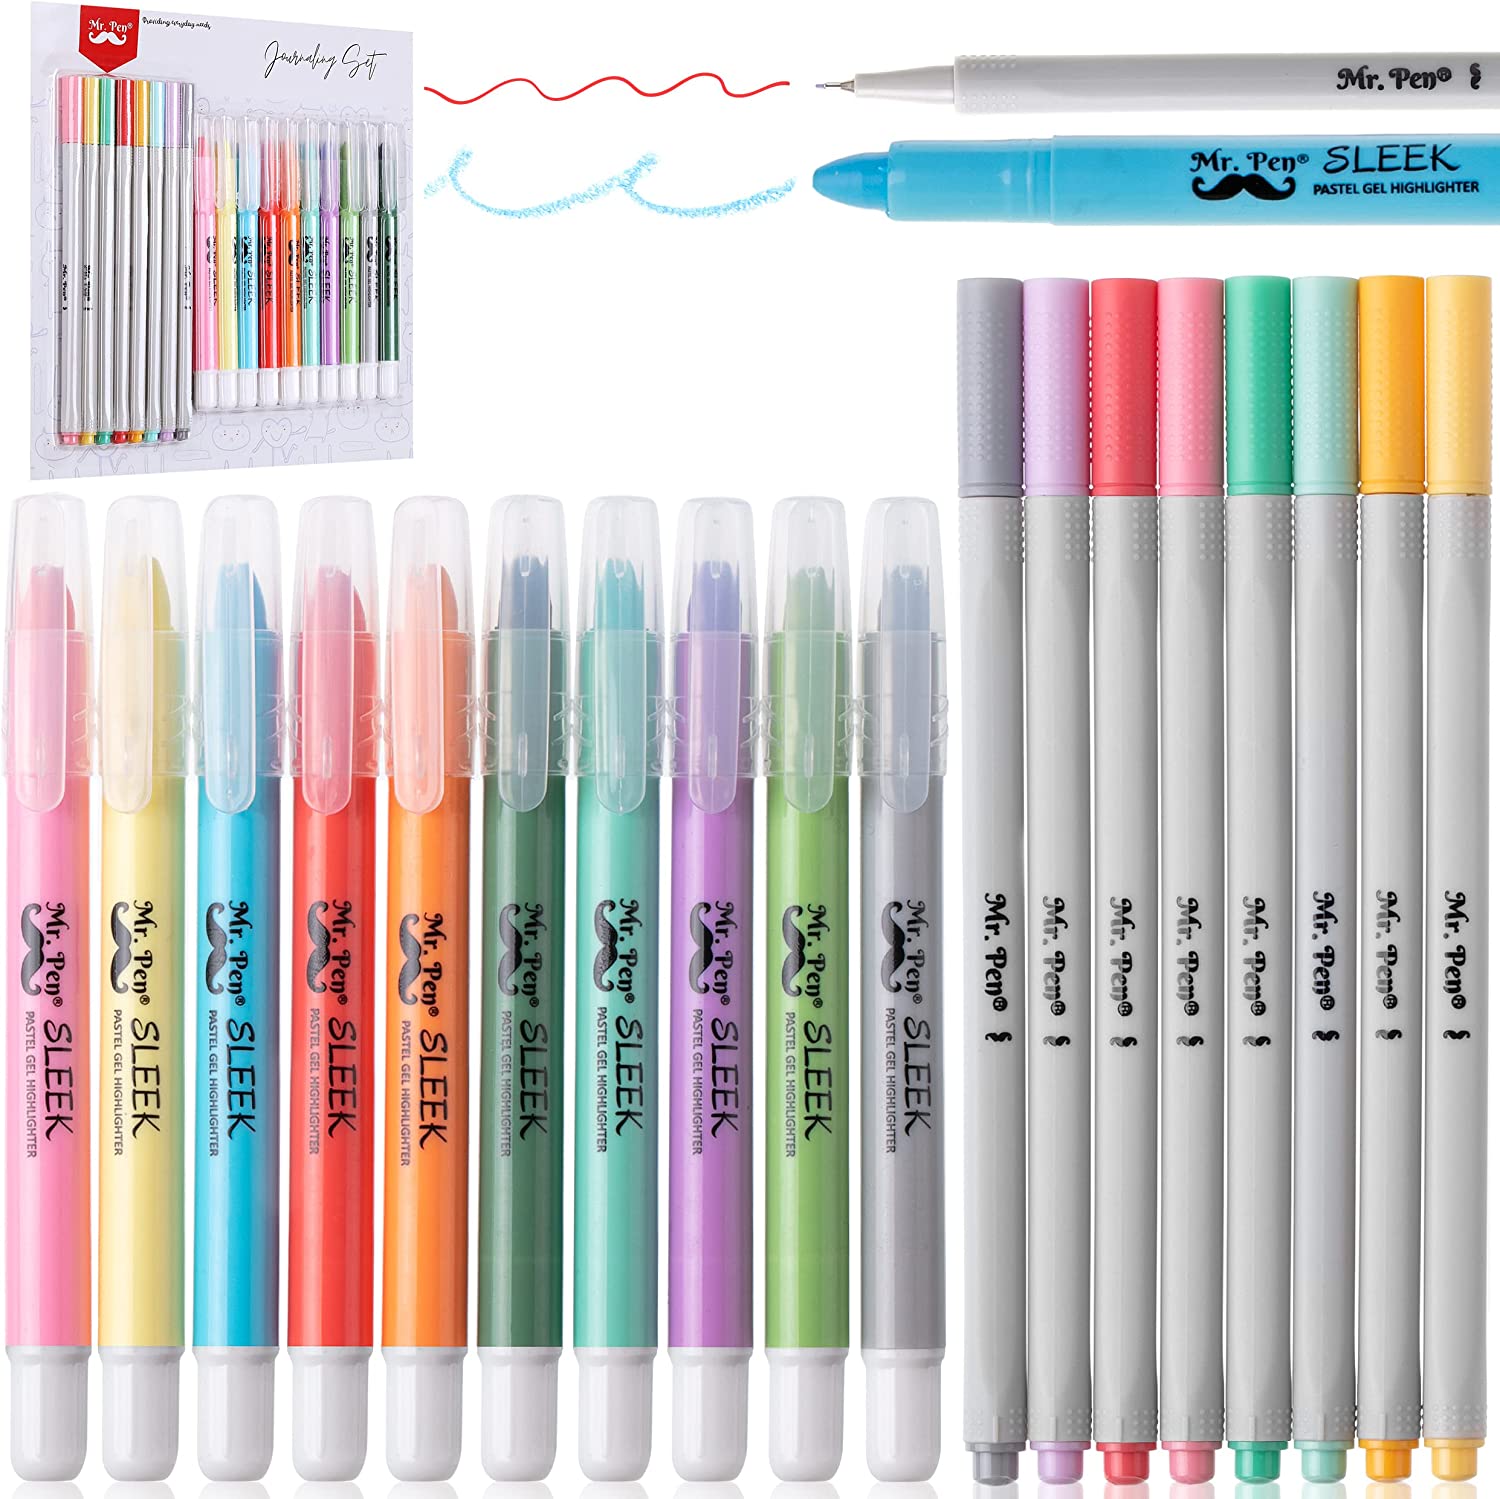  Mr Pen- Bible Highlighters And Pens No Bleed, 8 Pack,  Pastel, Gel Highlighters, Bible Pens No Bleed Through, Bible Highlighters  No Bleed, Bible Journaling Kit, Bible Pens And Highlighters No